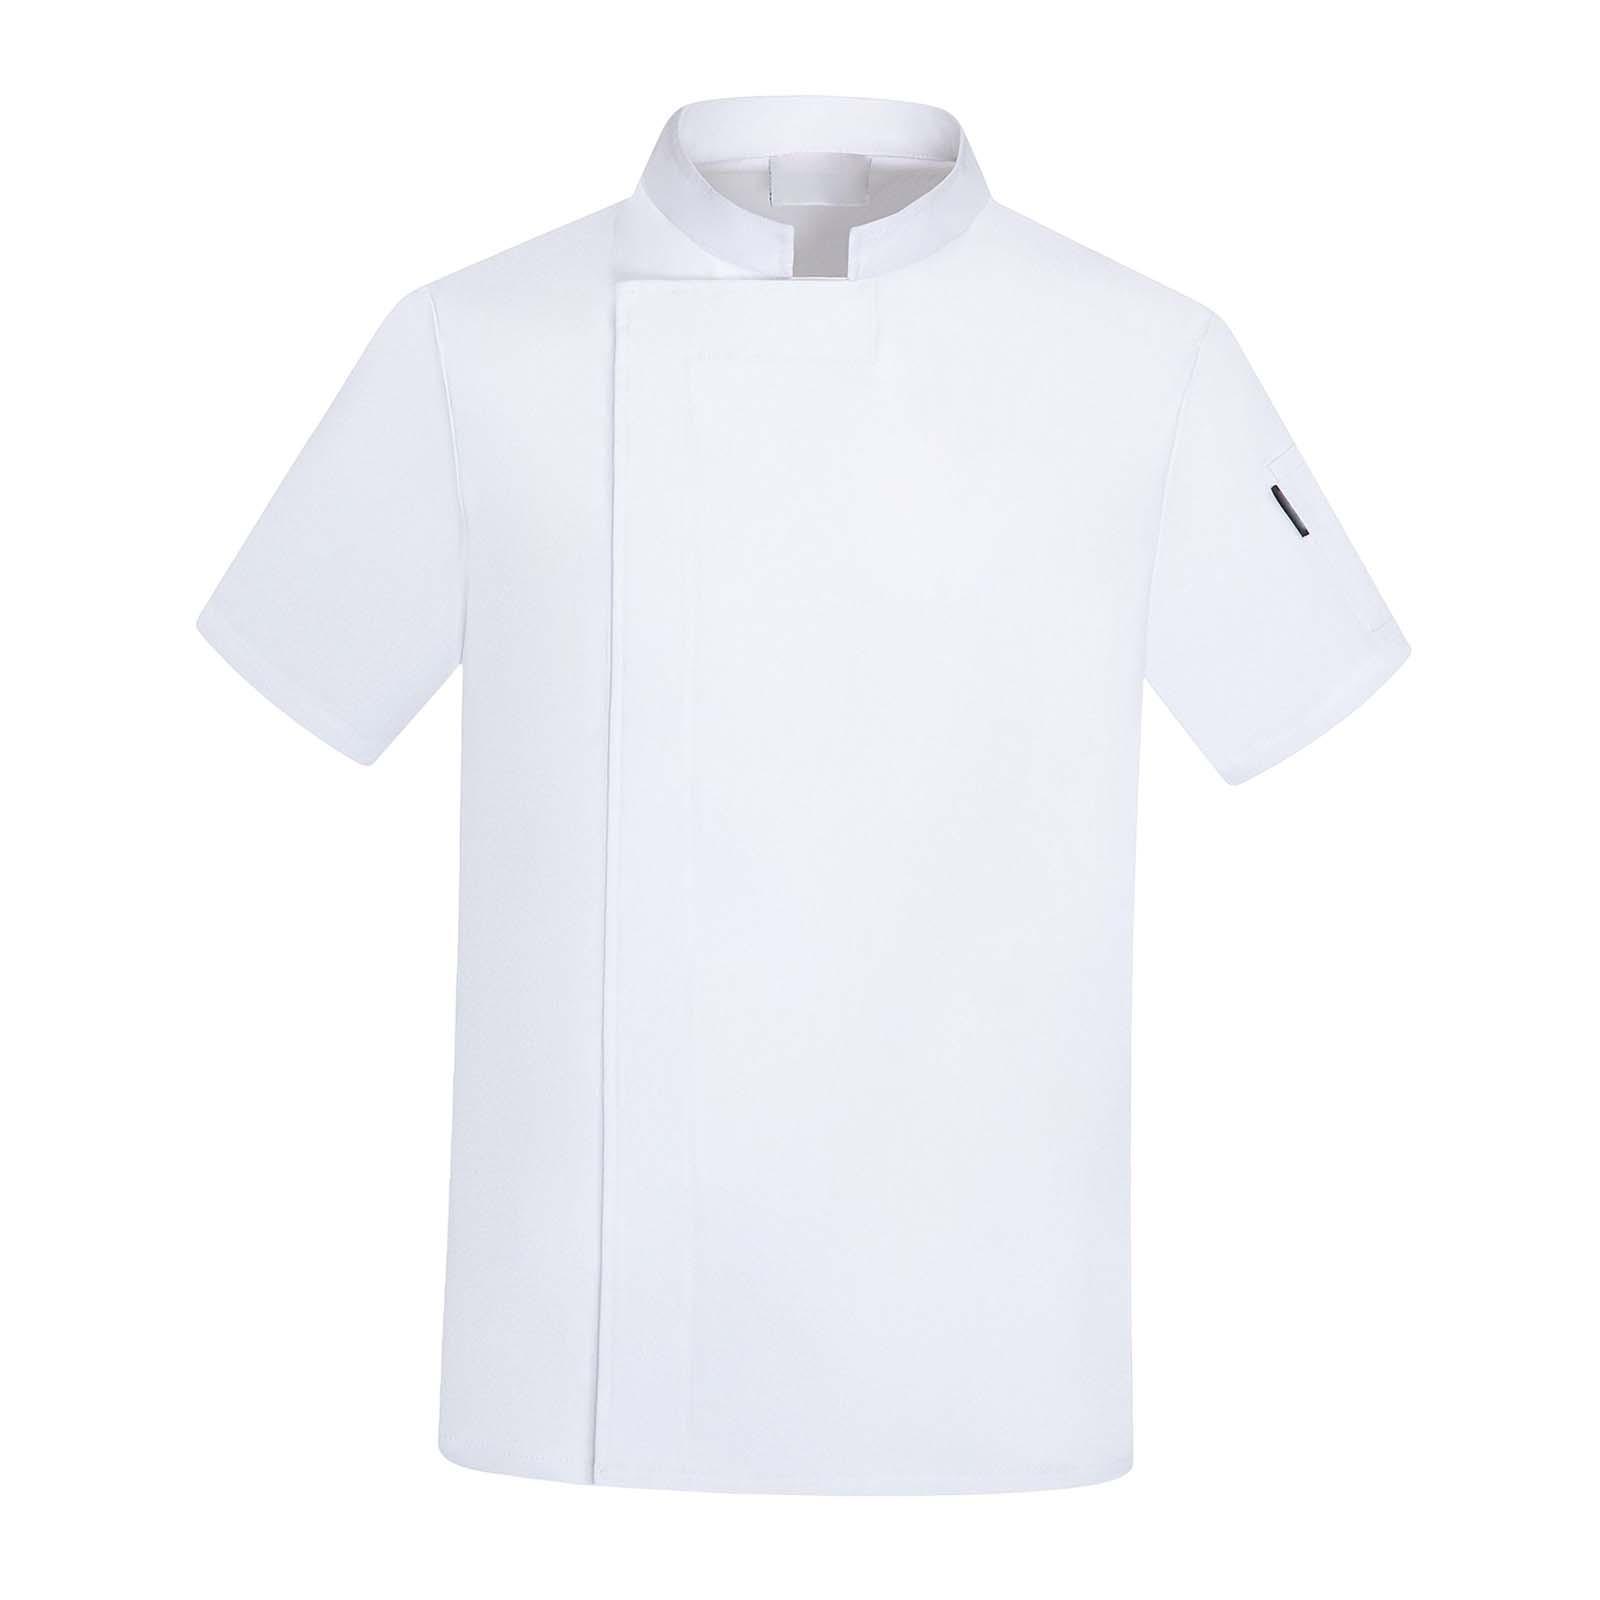 Chef Coat Jacket Breathable Waiter Waitress Apparel Executive Short Length Sleeve Chef Clothes for Bakery Food Service Hotel Catering